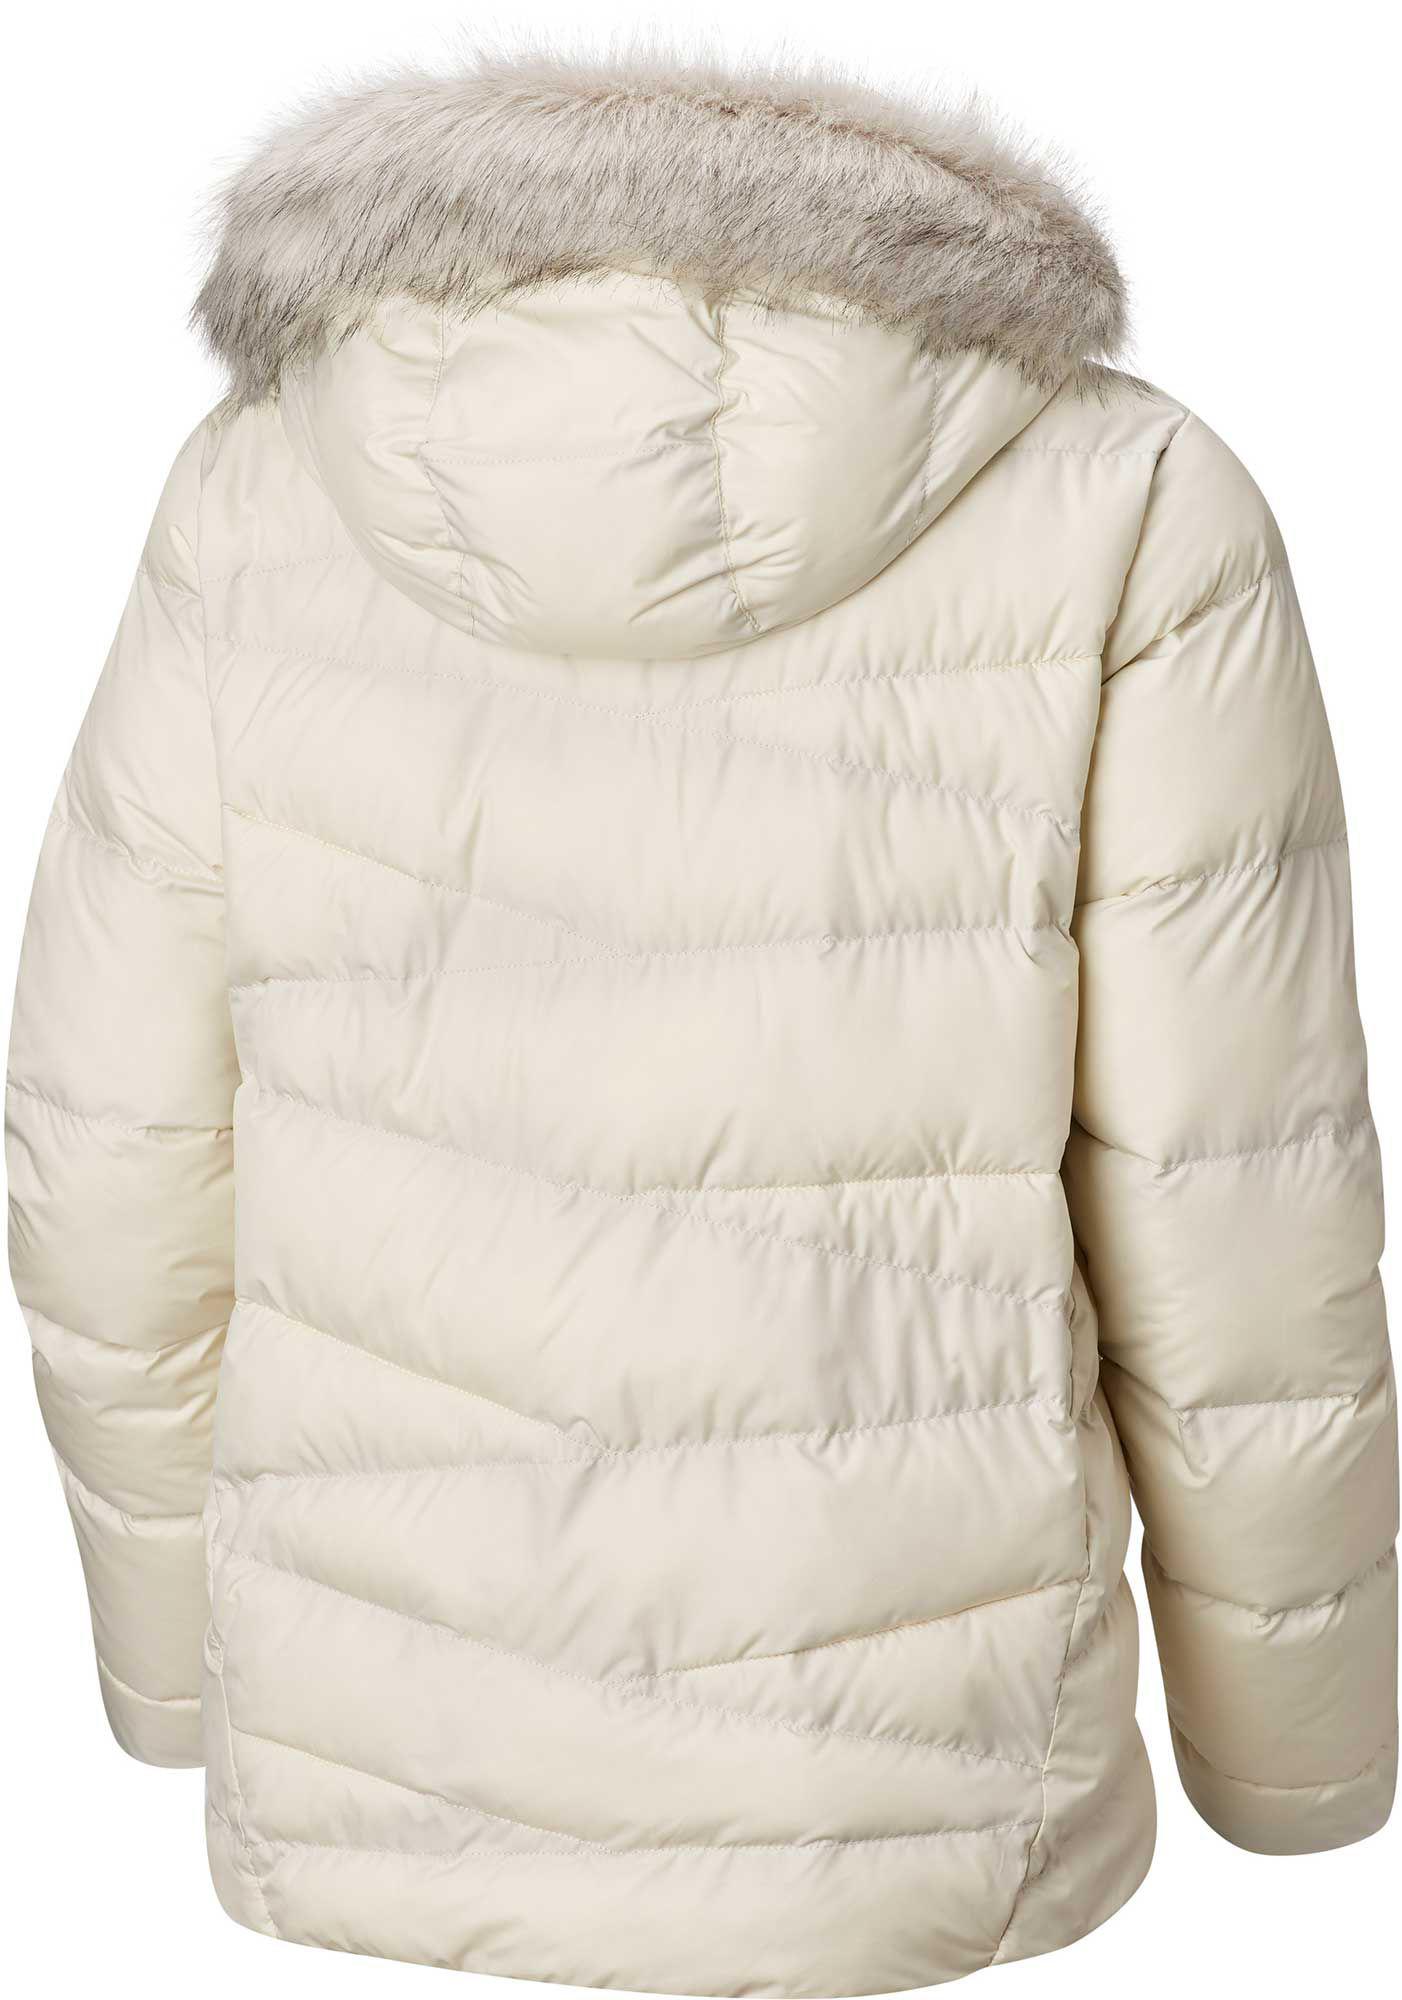 columbia peak to park insulated jacket for ladies